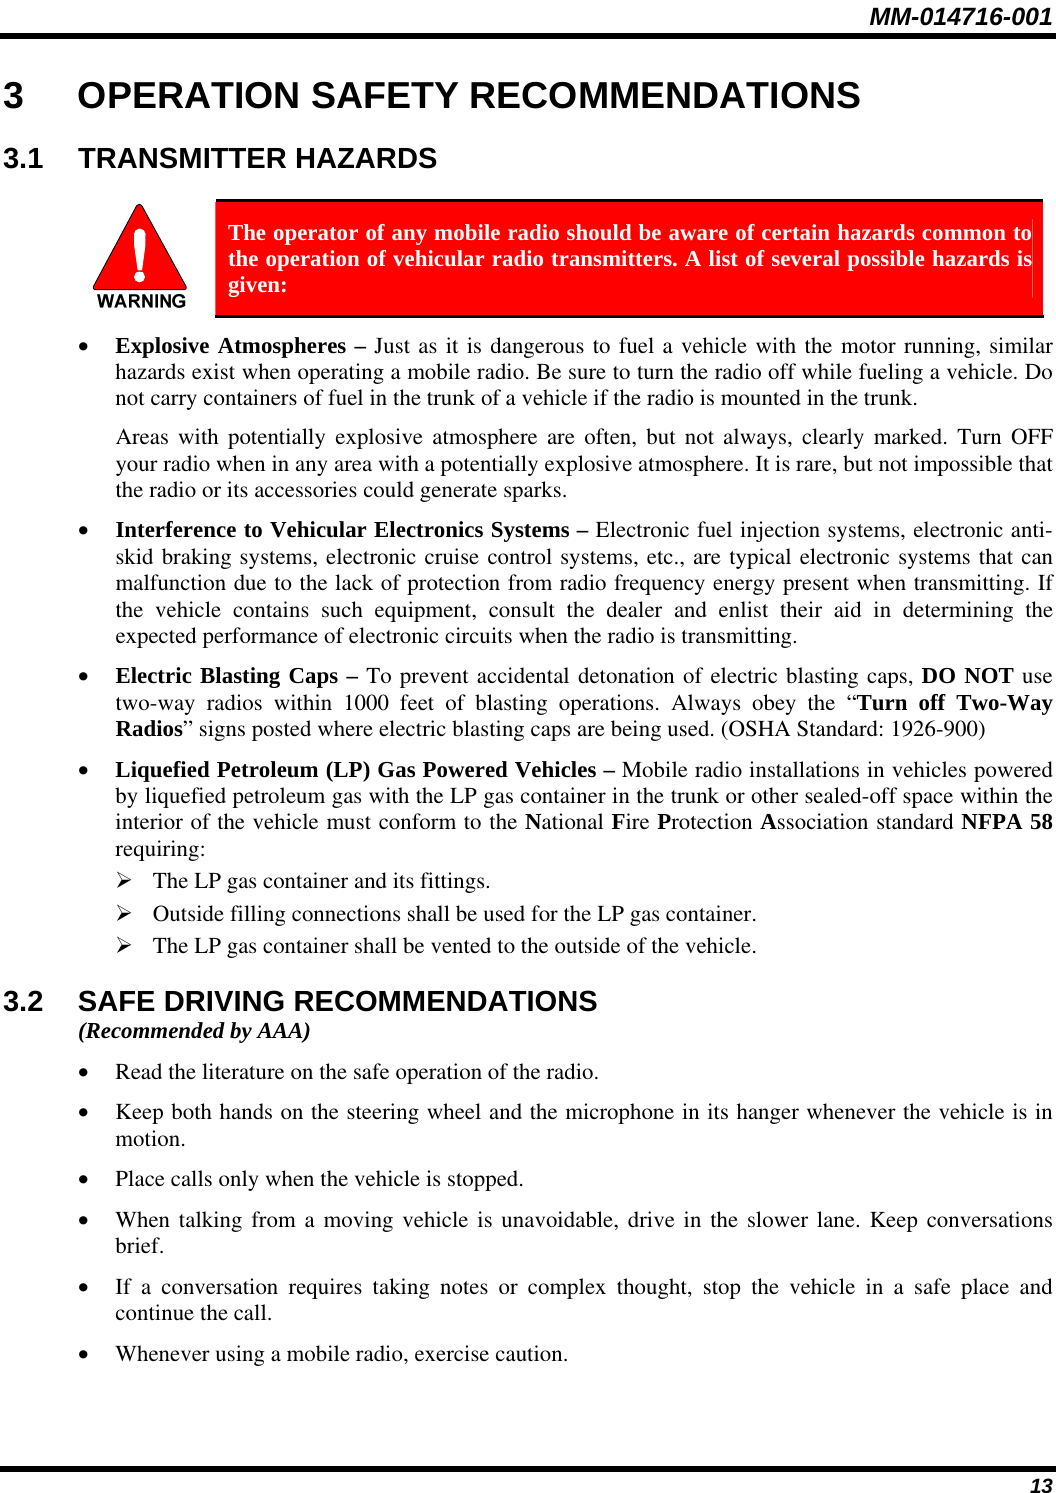 MM-014716-001 13 3 OPERATION SAFETY RECOMMENDATIONS 3.1 TRANSMITTER HAZARDS   The operator of any mobile radio should be aware of certain hazards common to the operation of vehicular radio transmitters. A list of several possible hazards is given: • Explosive Atmospheres – Just as it is dangerous to fuel a vehicle with the motor running, similar hazards exist when operating a mobile radio. Be sure to turn the radio off while fueling a vehicle. Do not carry containers of fuel in the trunk of a vehicle if the radio is mounted in the trunk. Areas with potentially explosive atmosphere are often, but not always, clearly marked. Turn OFF your radio when in any area with a potentially explosive atmosphere. It is rare, but not impossible that the radio or its accessories could generate sparks. • Interference to Vehicular Electronics Systems – Electronic fuel injection systems, electronic anti-skid braking systems, electronic cruise control systems, etc., are typical electronic systems that can malfunction due to the lack of protection from radio frequency energy present when transmitting. If the vehicle contains such equipment, consult the dealer and enlist their aid in determining the expected performance of electronic circuits when the radio is transmitting. • Electric Blasting Caps – To prevent accidental detonation of electric blasting caps, DO NOT use two-way radios within 1000 feet of blasting operations. Always obey the “Turn off Two-Way Radios” signs posted where electric blasting caps are being used. (OSHA Standard: 1926-900) • Liquefied Petroleum (LP) Gas Powered Vehicles – Mobile radio installations in vehicles powered by liquefied petroleum gas with the LP gas container in the trunk or other sealed-off space within the interior of the vehicle must conform to the National Fire Protection Association standard NFPA 58 requiring: ¾ The LP gas container and its fittings. ¾ Outside filling connections shall be used for the LP gas container. ¾ The LP gas container shall be vented to the outside of the vehicle. 3.2  SAFE DRIVING RECOMMENDATIONS (Recommended by AAA) • Read the literature on the safe operation of the radio. • Keep both hands on the steering wheel and the microphone in its hanger whenever the vehicle is in motion. • Place calls only when the vehicle is stopped. • When talking from a moving vehicle is unavoidable, drive in the slower lane. Keep conversations brief. • If a conversation requires taking notes or complex thought, stop the vehicle in a safe place and continue the call. • Whenever using a mobile radio, exercise caution. 